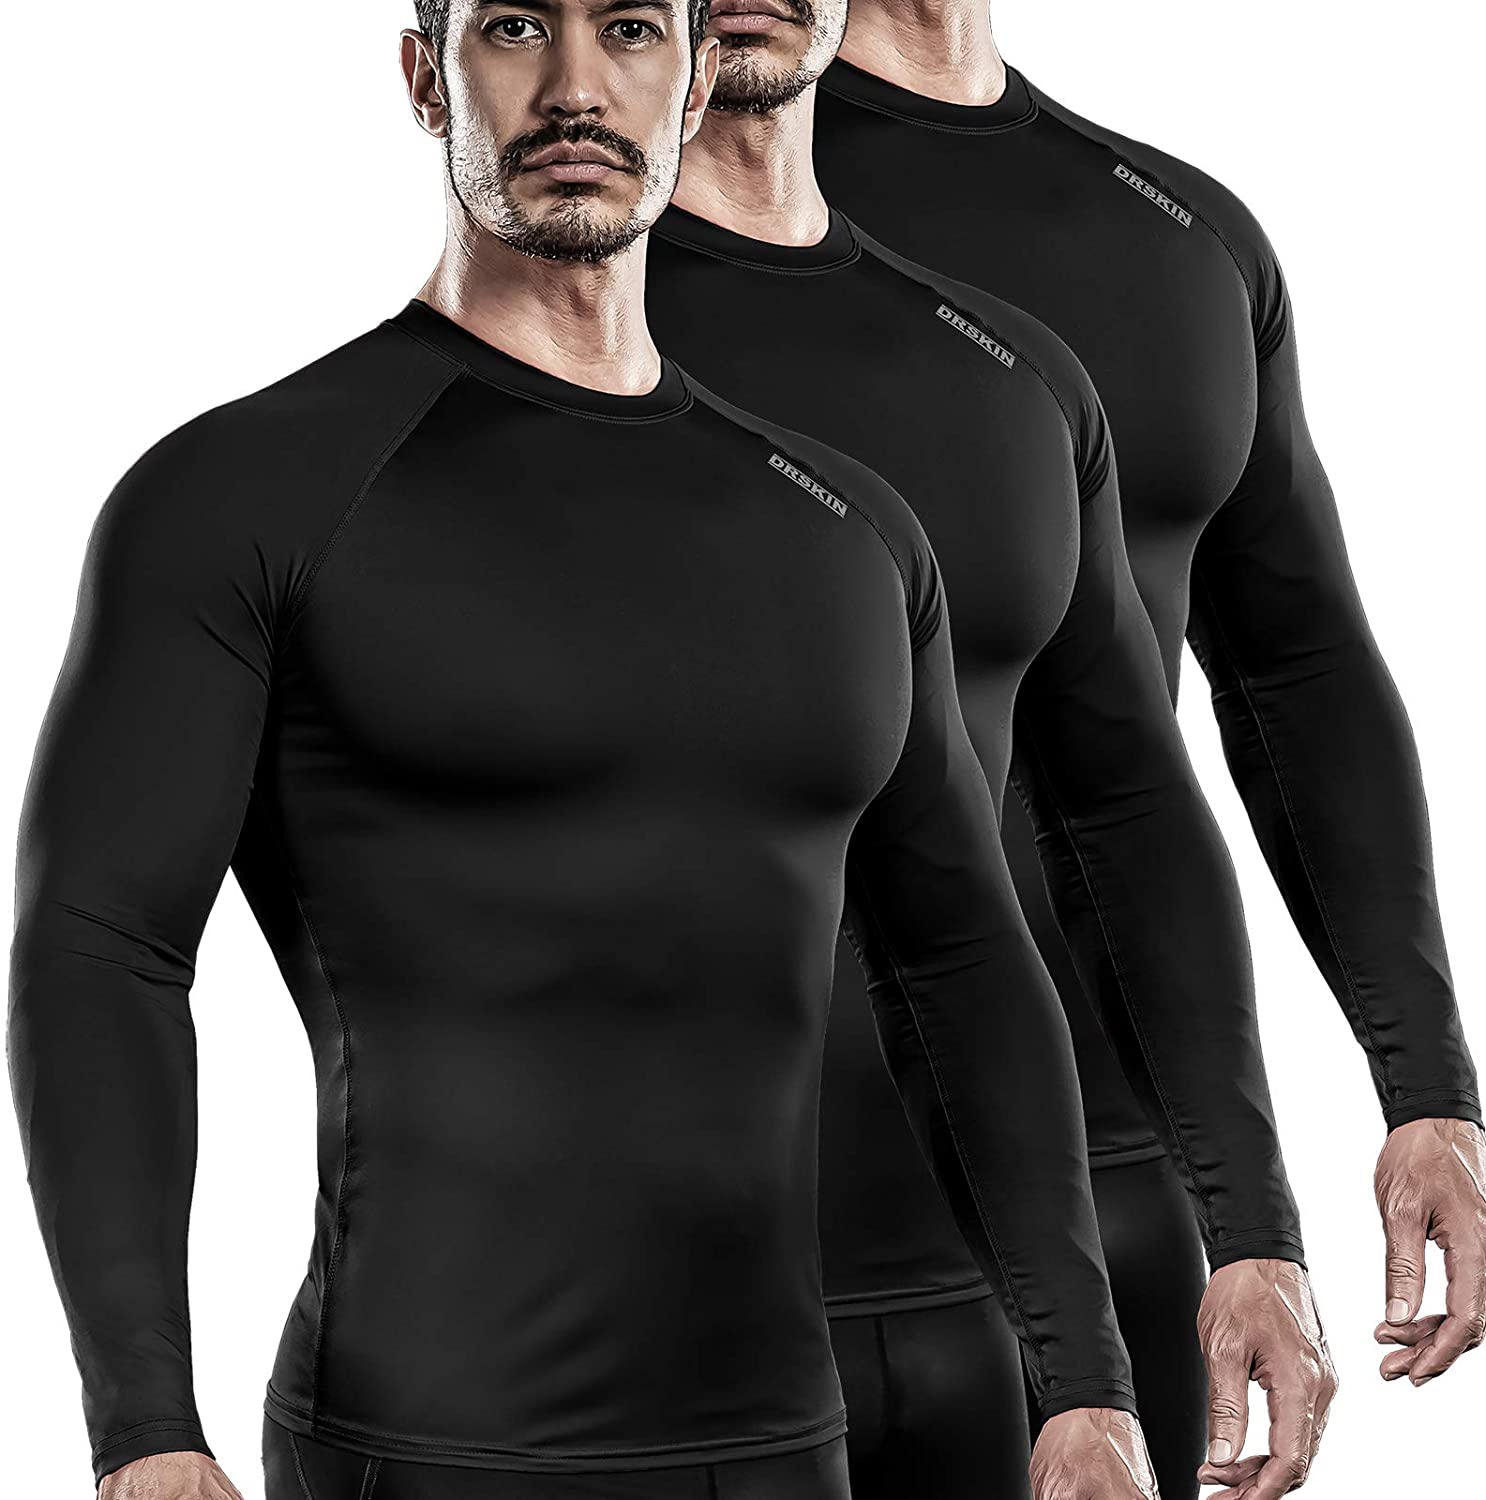 DRSKIN 1~3 Pack Men's Long Sleeve Compression Shirts Top Sports Workout ...